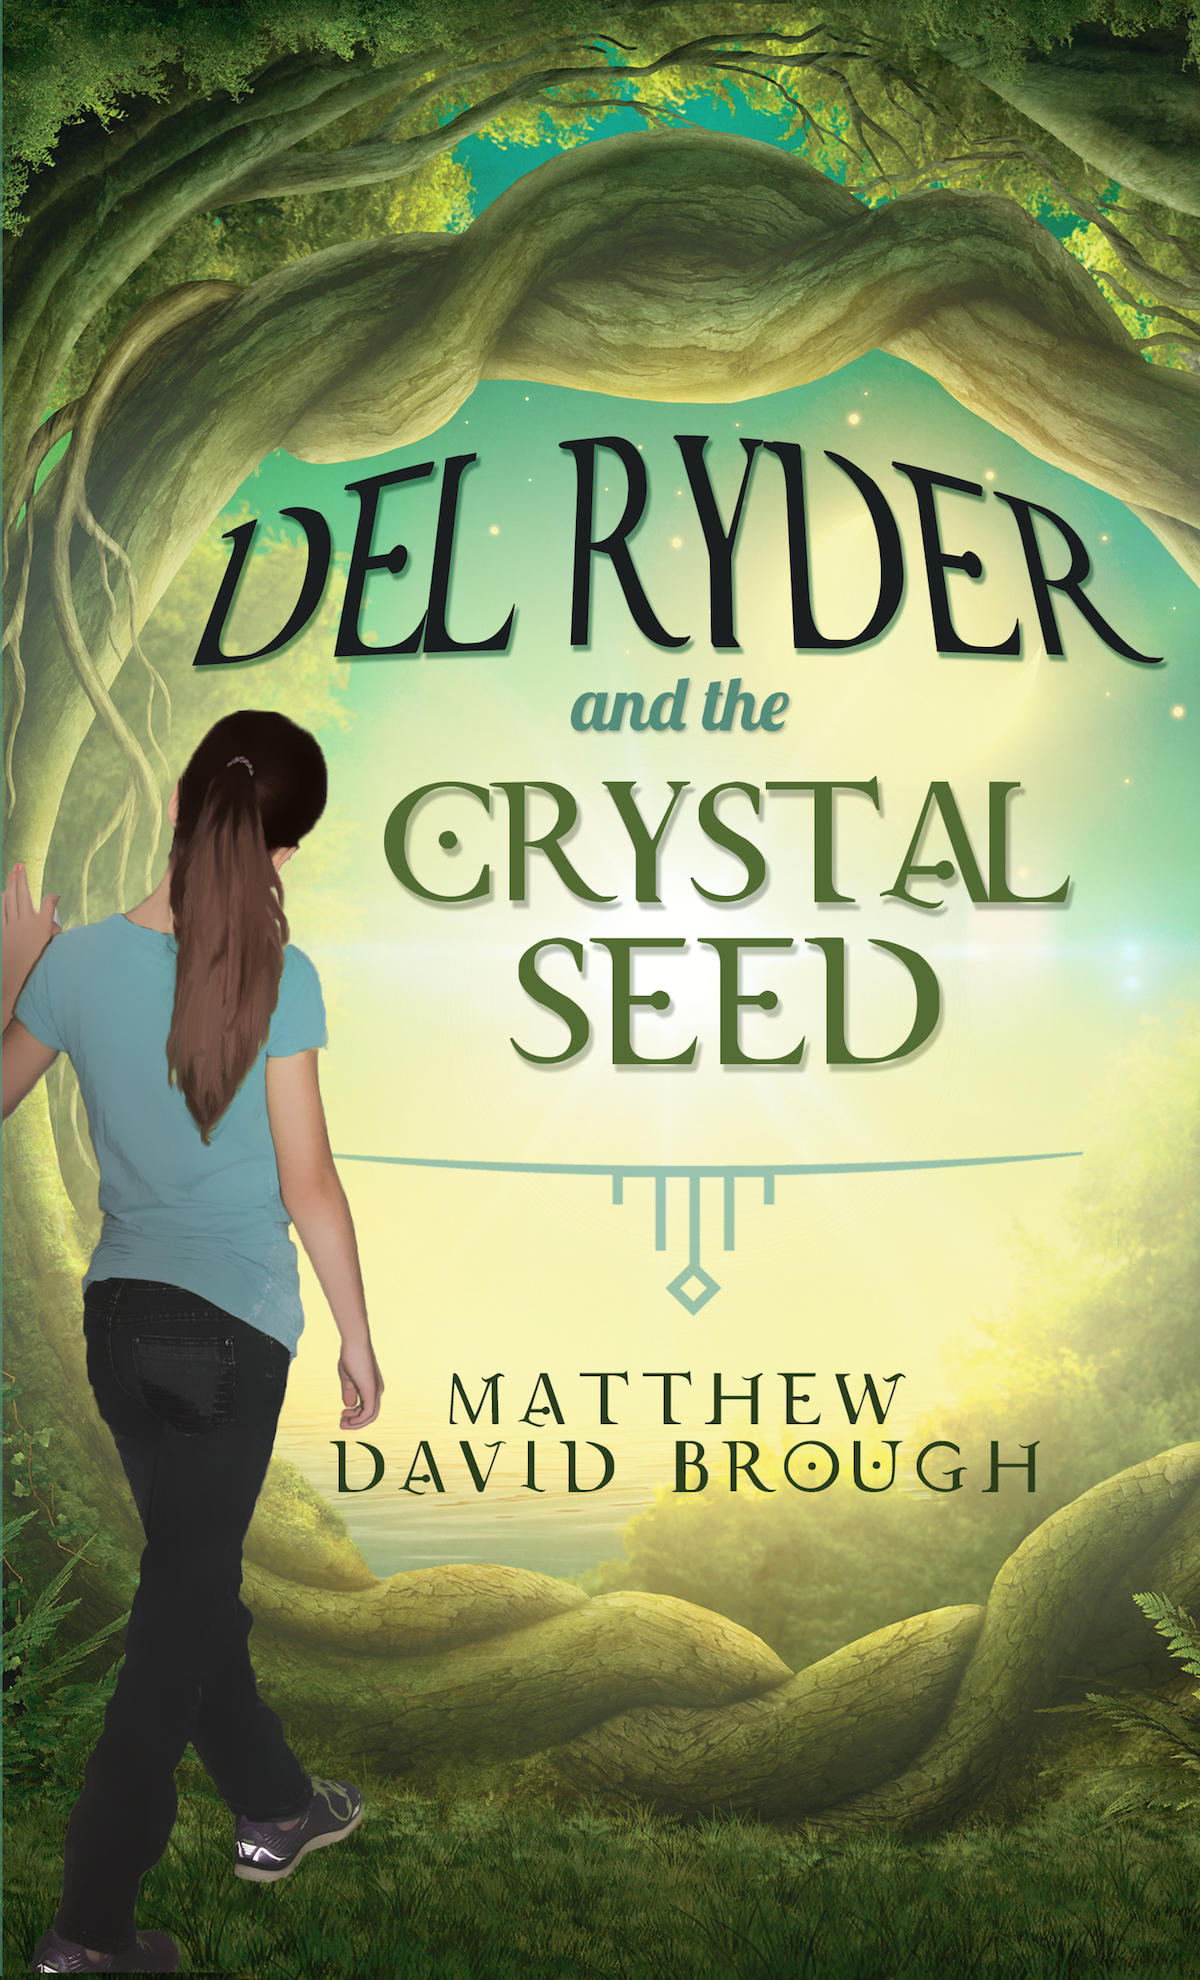 FREE: Del Ryder and the Crystal Seed by Matthew David Brough